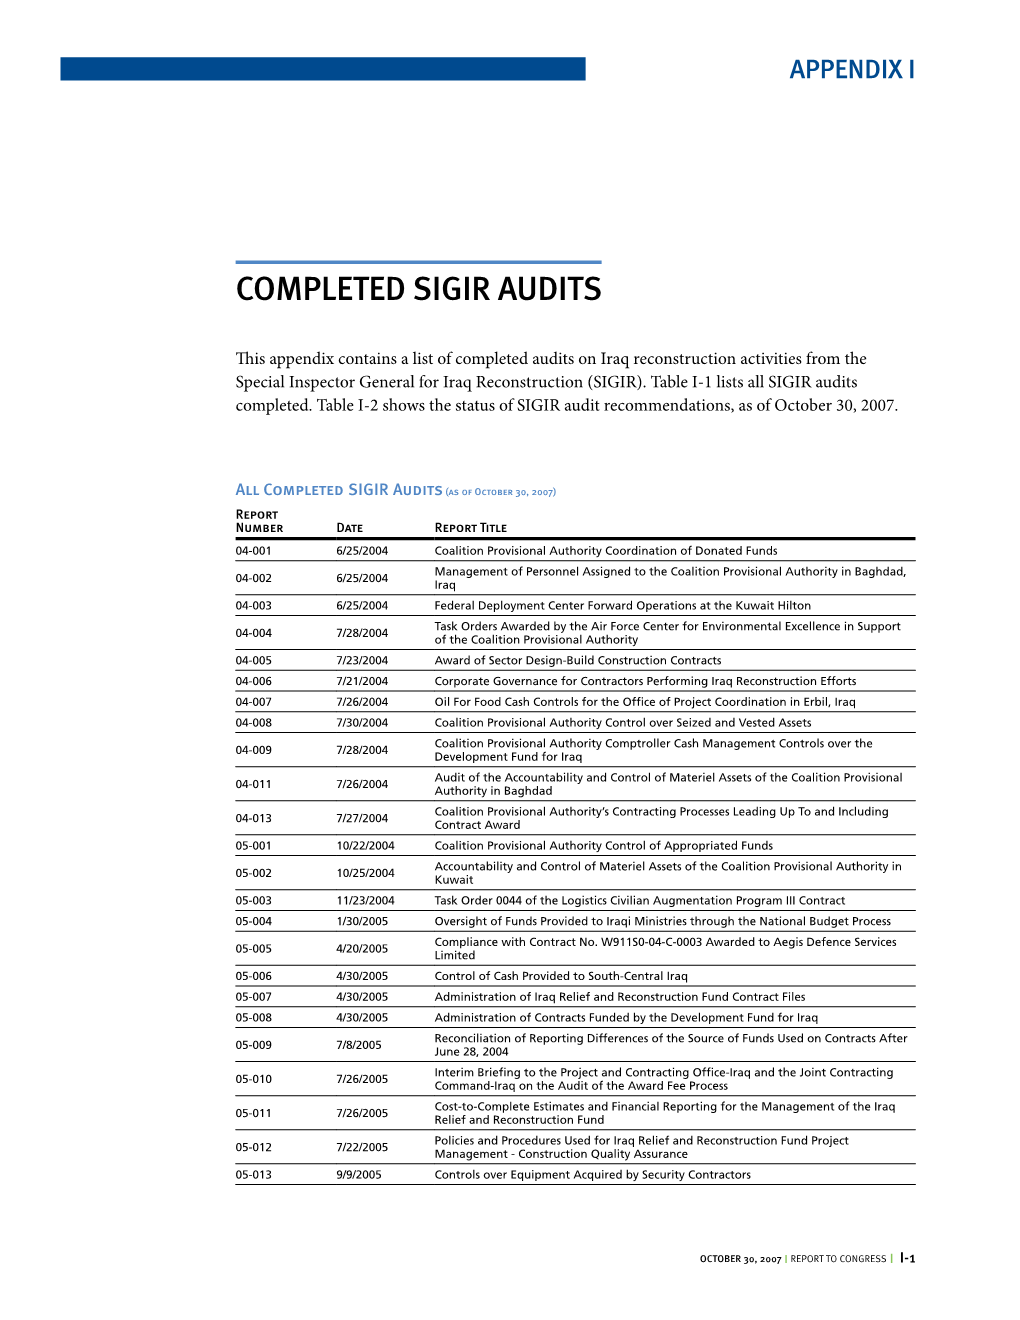 Completed SIGIR Audits